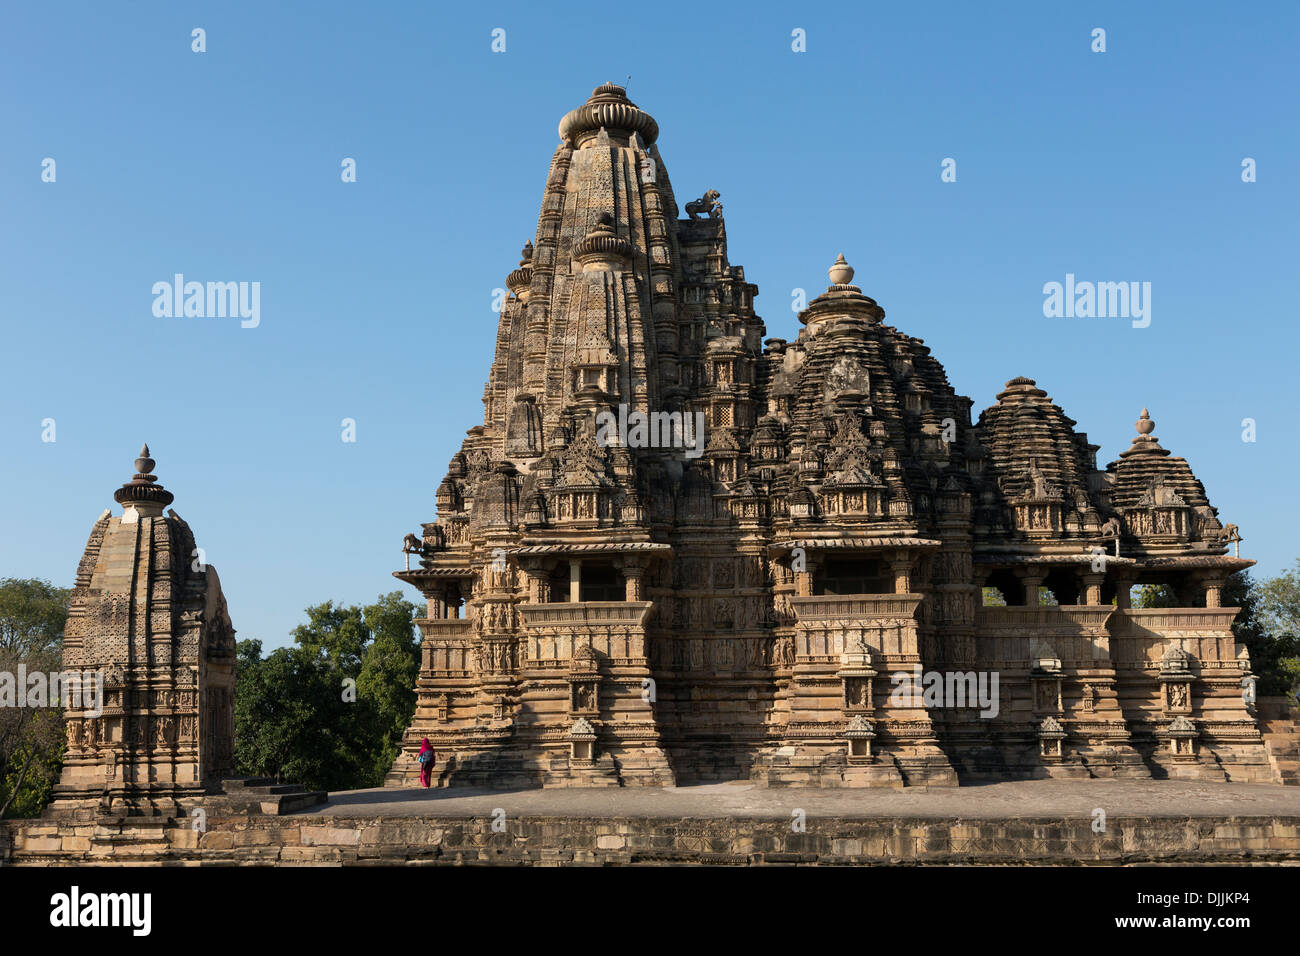 Lateral facade of the temple Kandariya Mahadev. It is the most spectacular an largest of all the temples in Khajuraho. Stock Photo